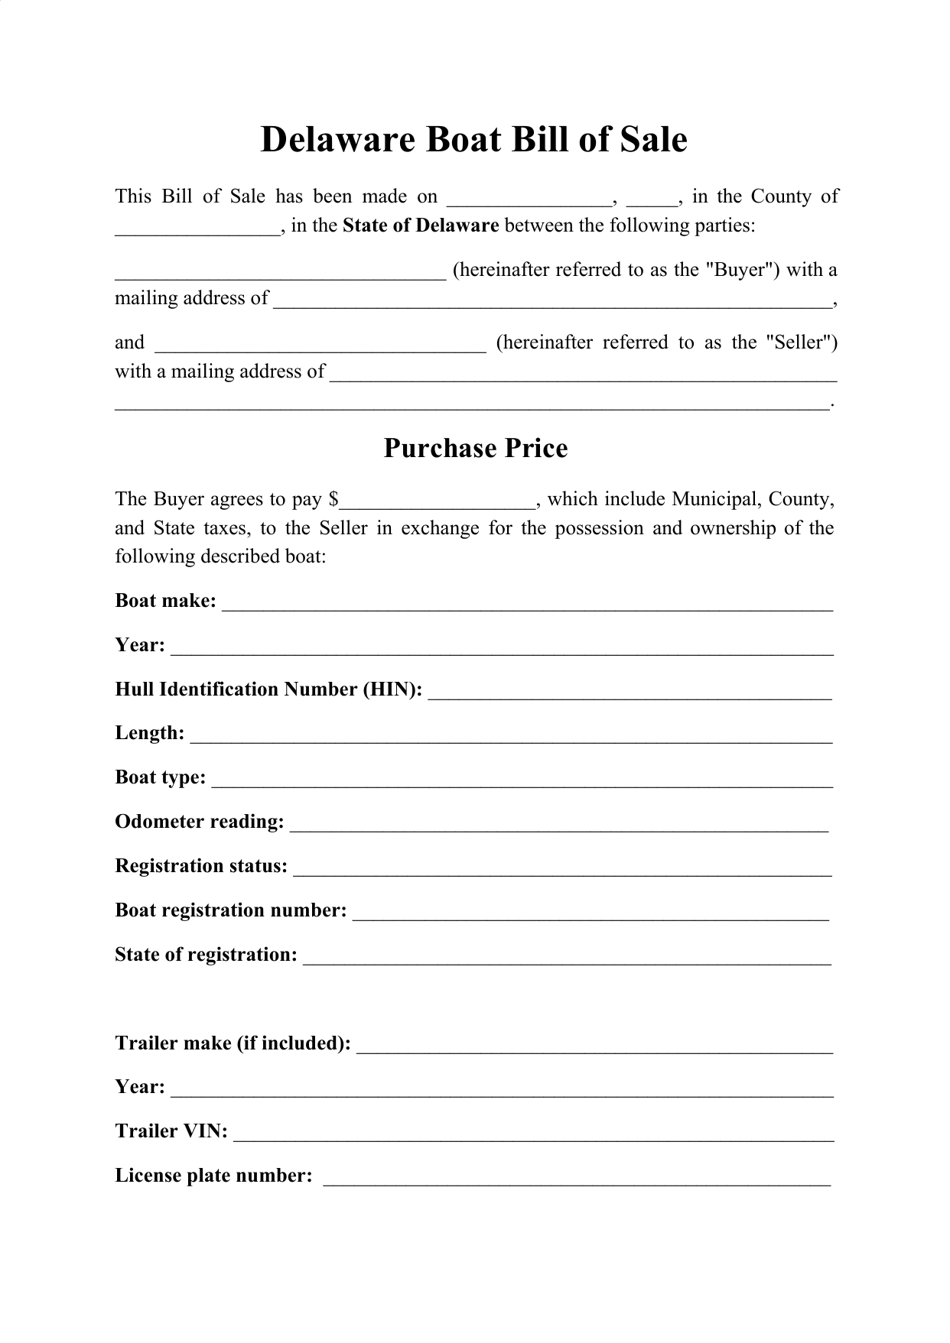 Delaware Boat Bill of Sale Form Fill Out Sign Online and Download